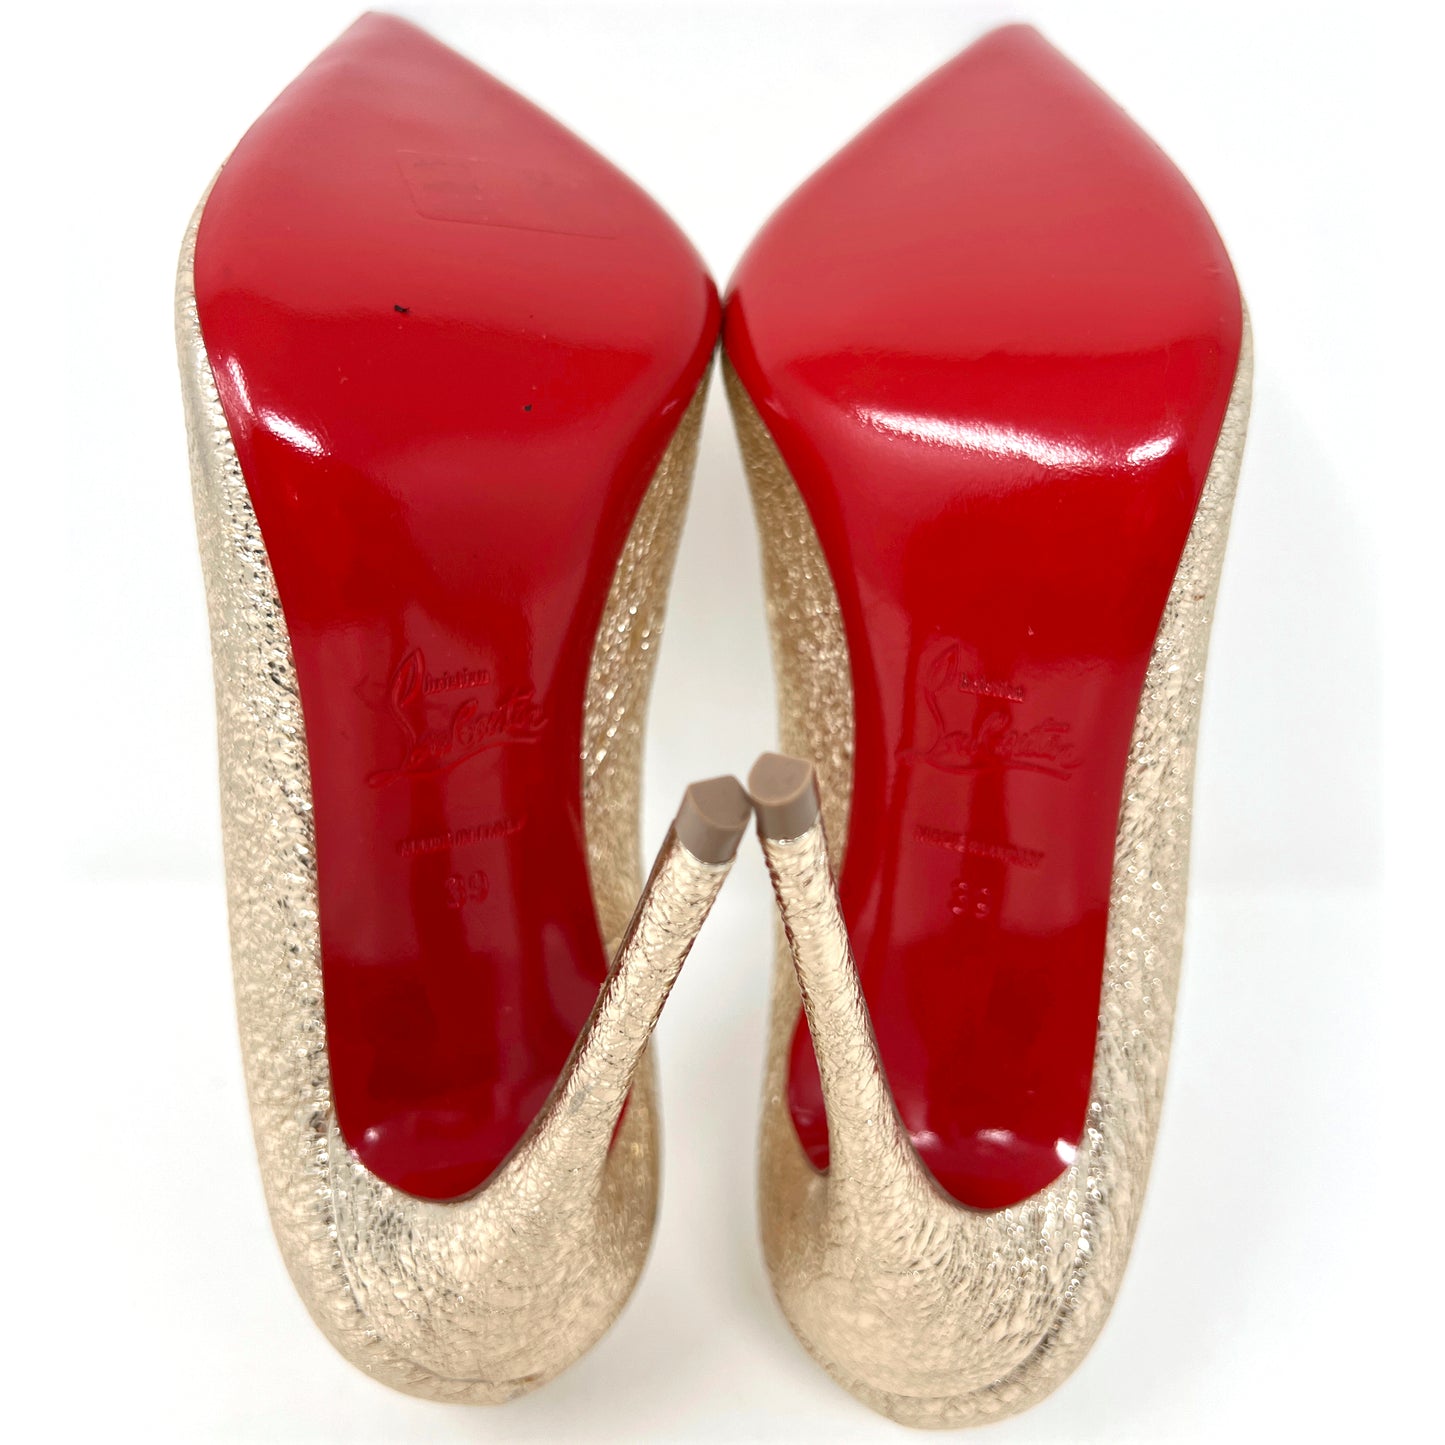 Christian Louboutin So Kate 120 Gold Foil Crinkled Leather Pointed Pumps Heels Size EU 39